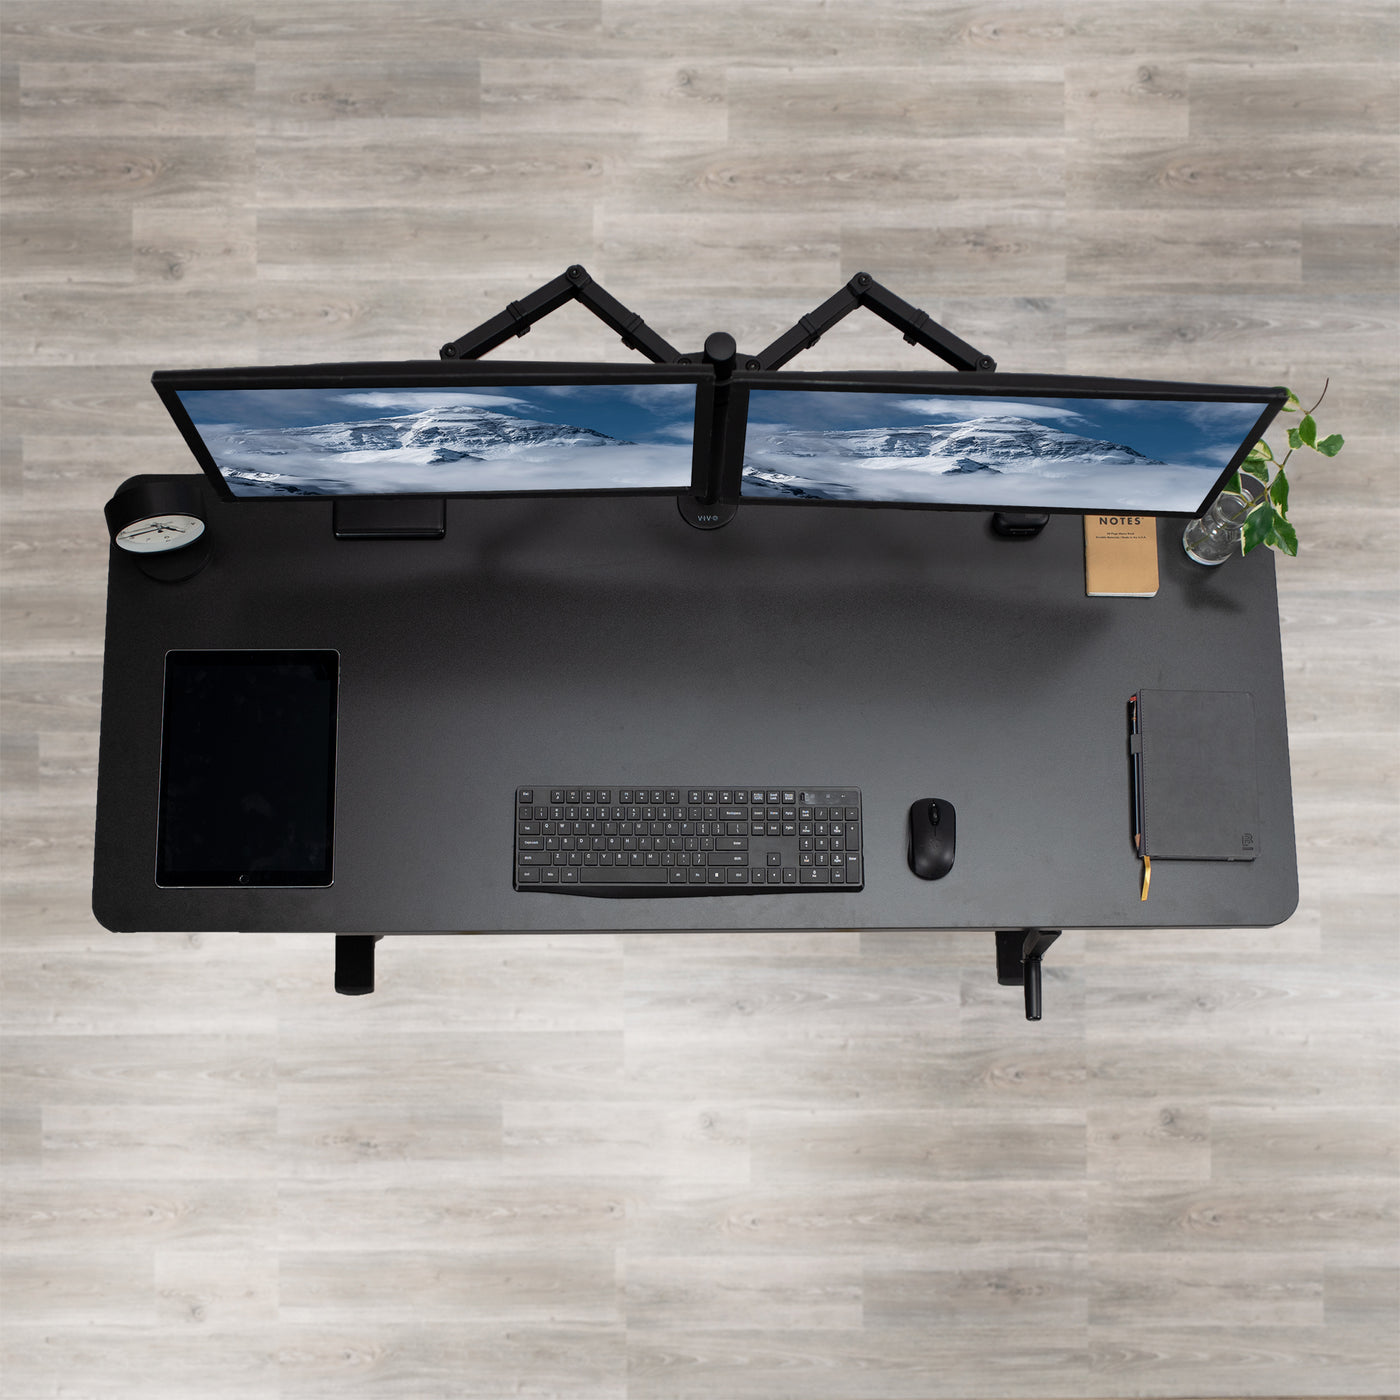 Spacious sit-to-stand desk design to comfortably hold all your office equipment.